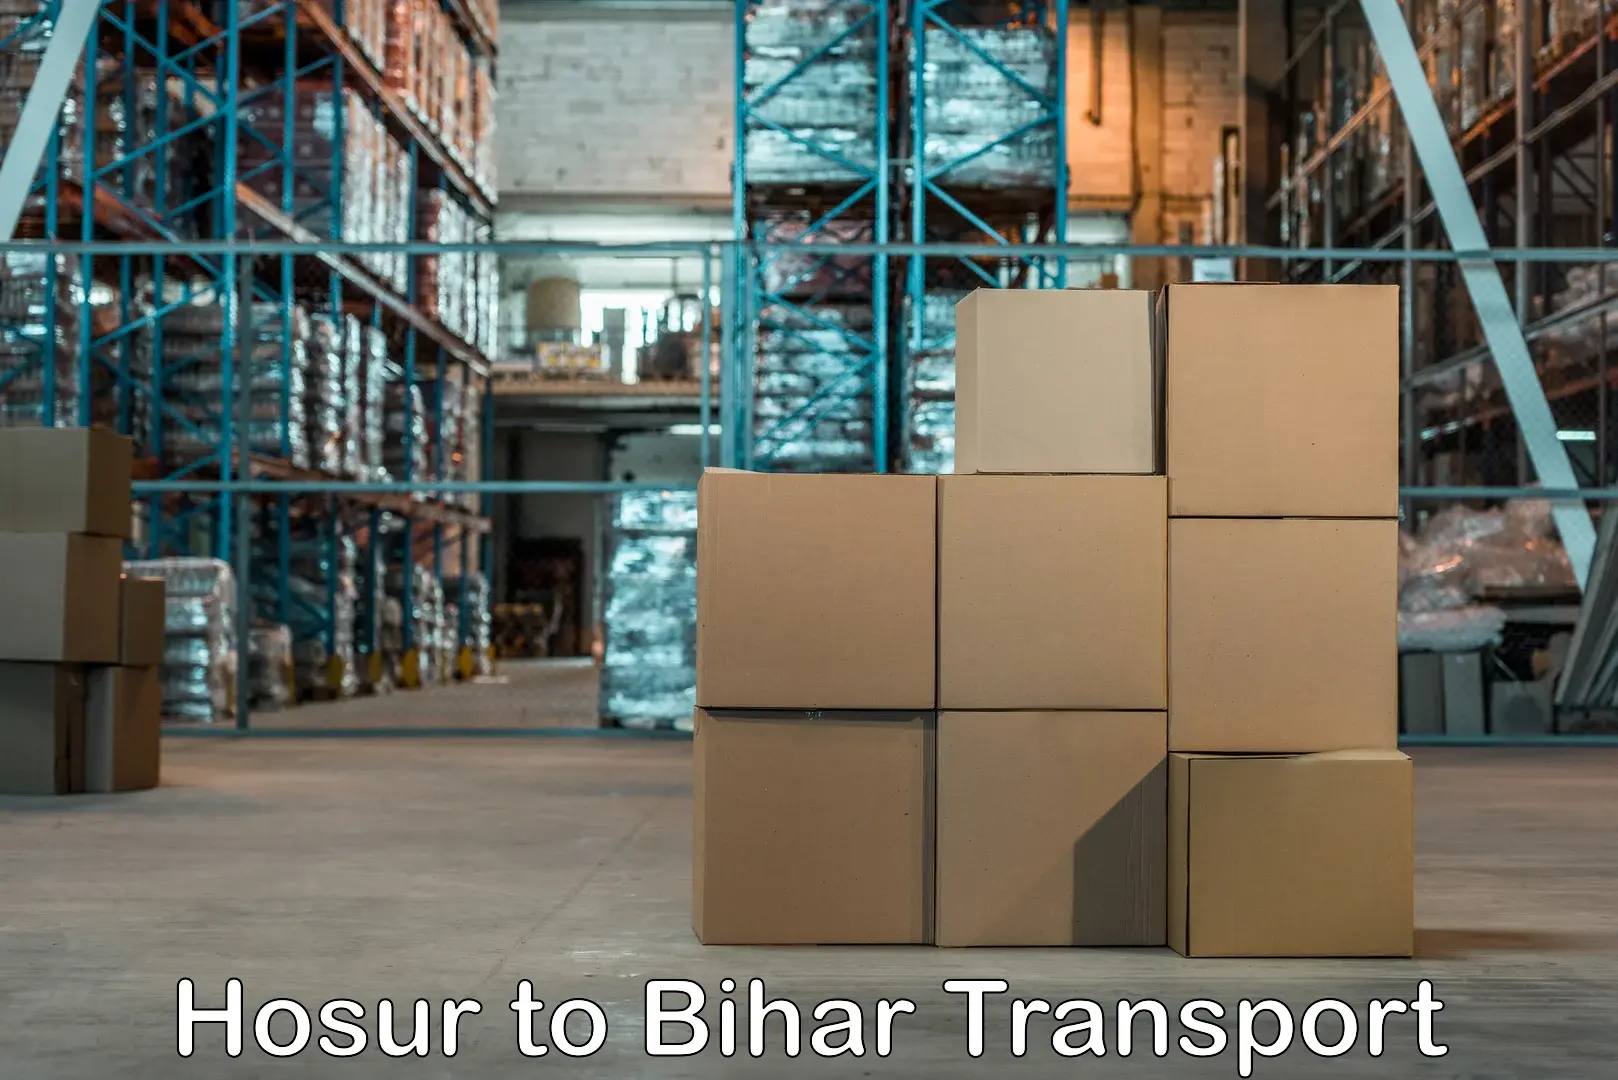 Truck transport companies in India Hosur to Fatwah